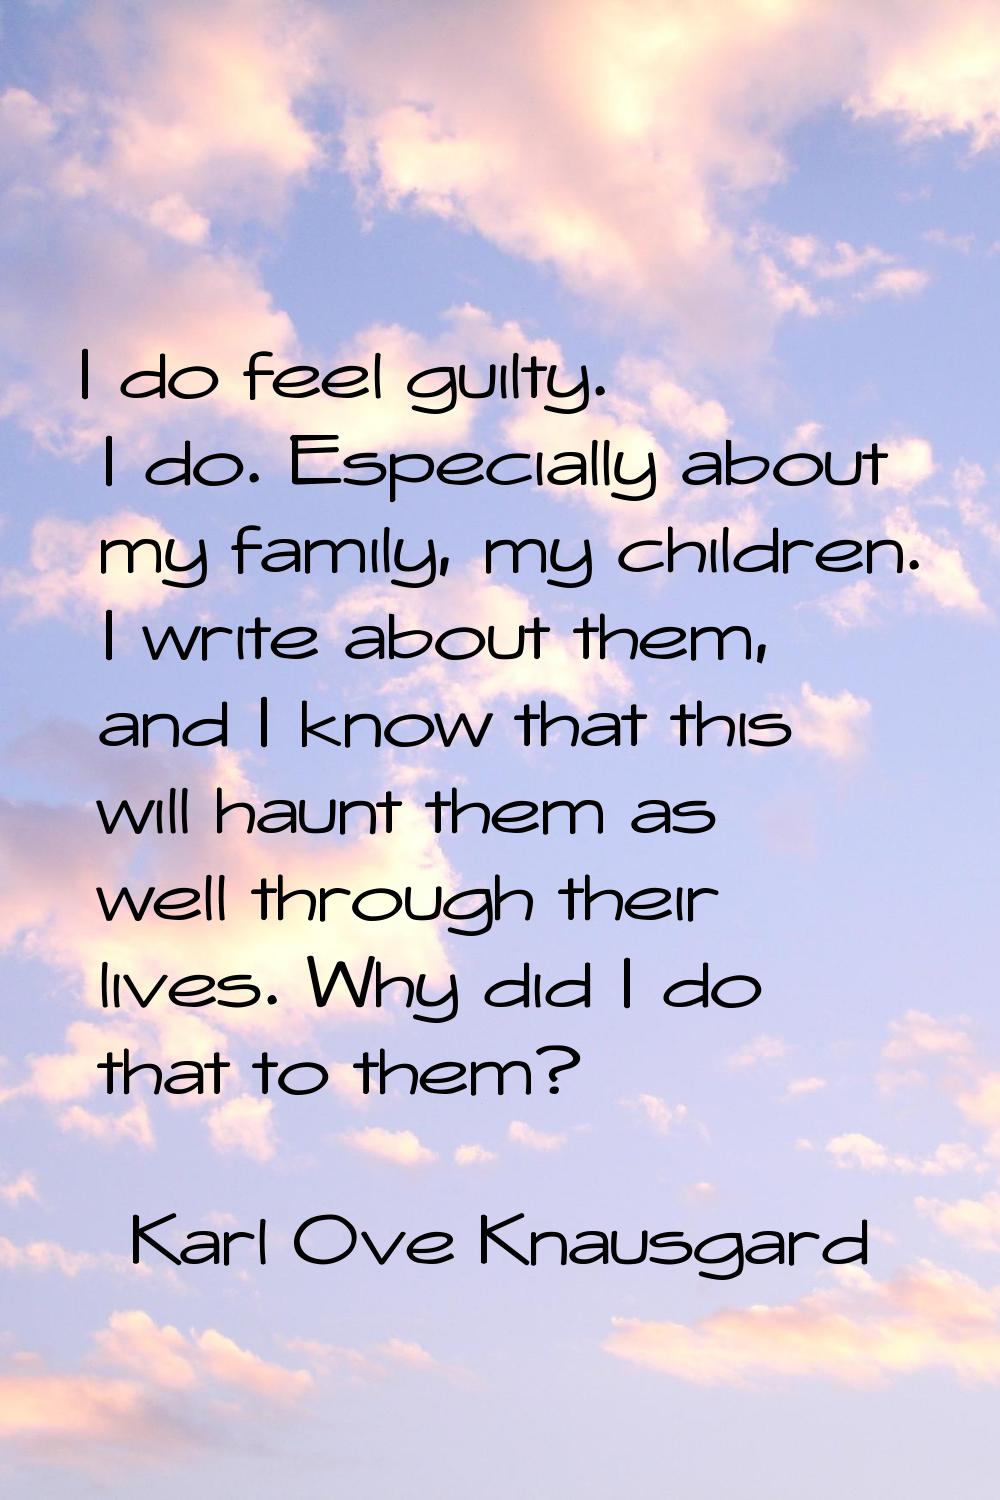 I do feel guilty. I do. Especially about my family, my children. I write about them, and I know tha